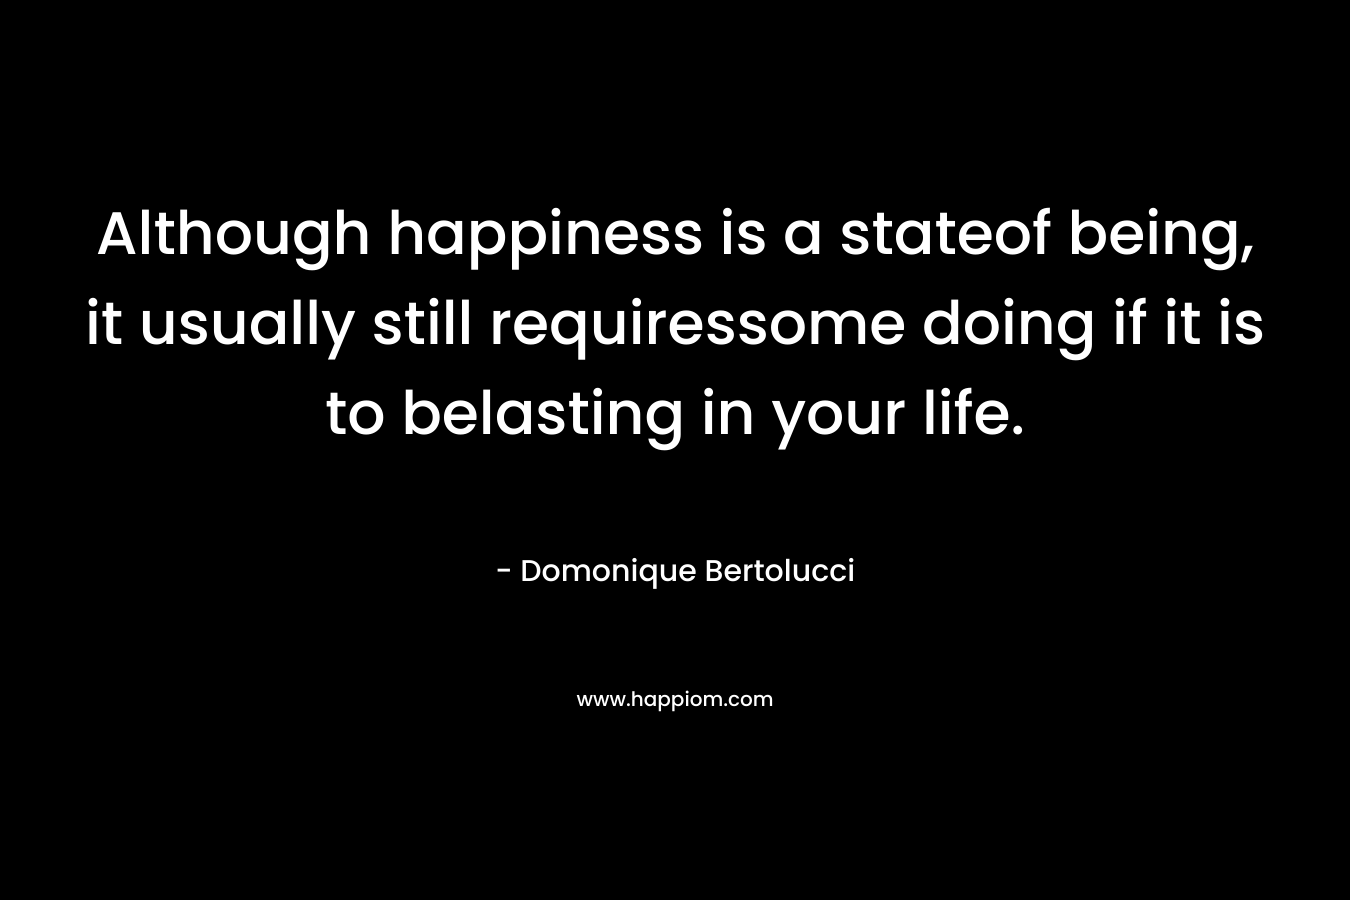 Although happiness is a stateof being, it usually still requiressome doing if it is to belasting in your life. – Domonique Bertolucci